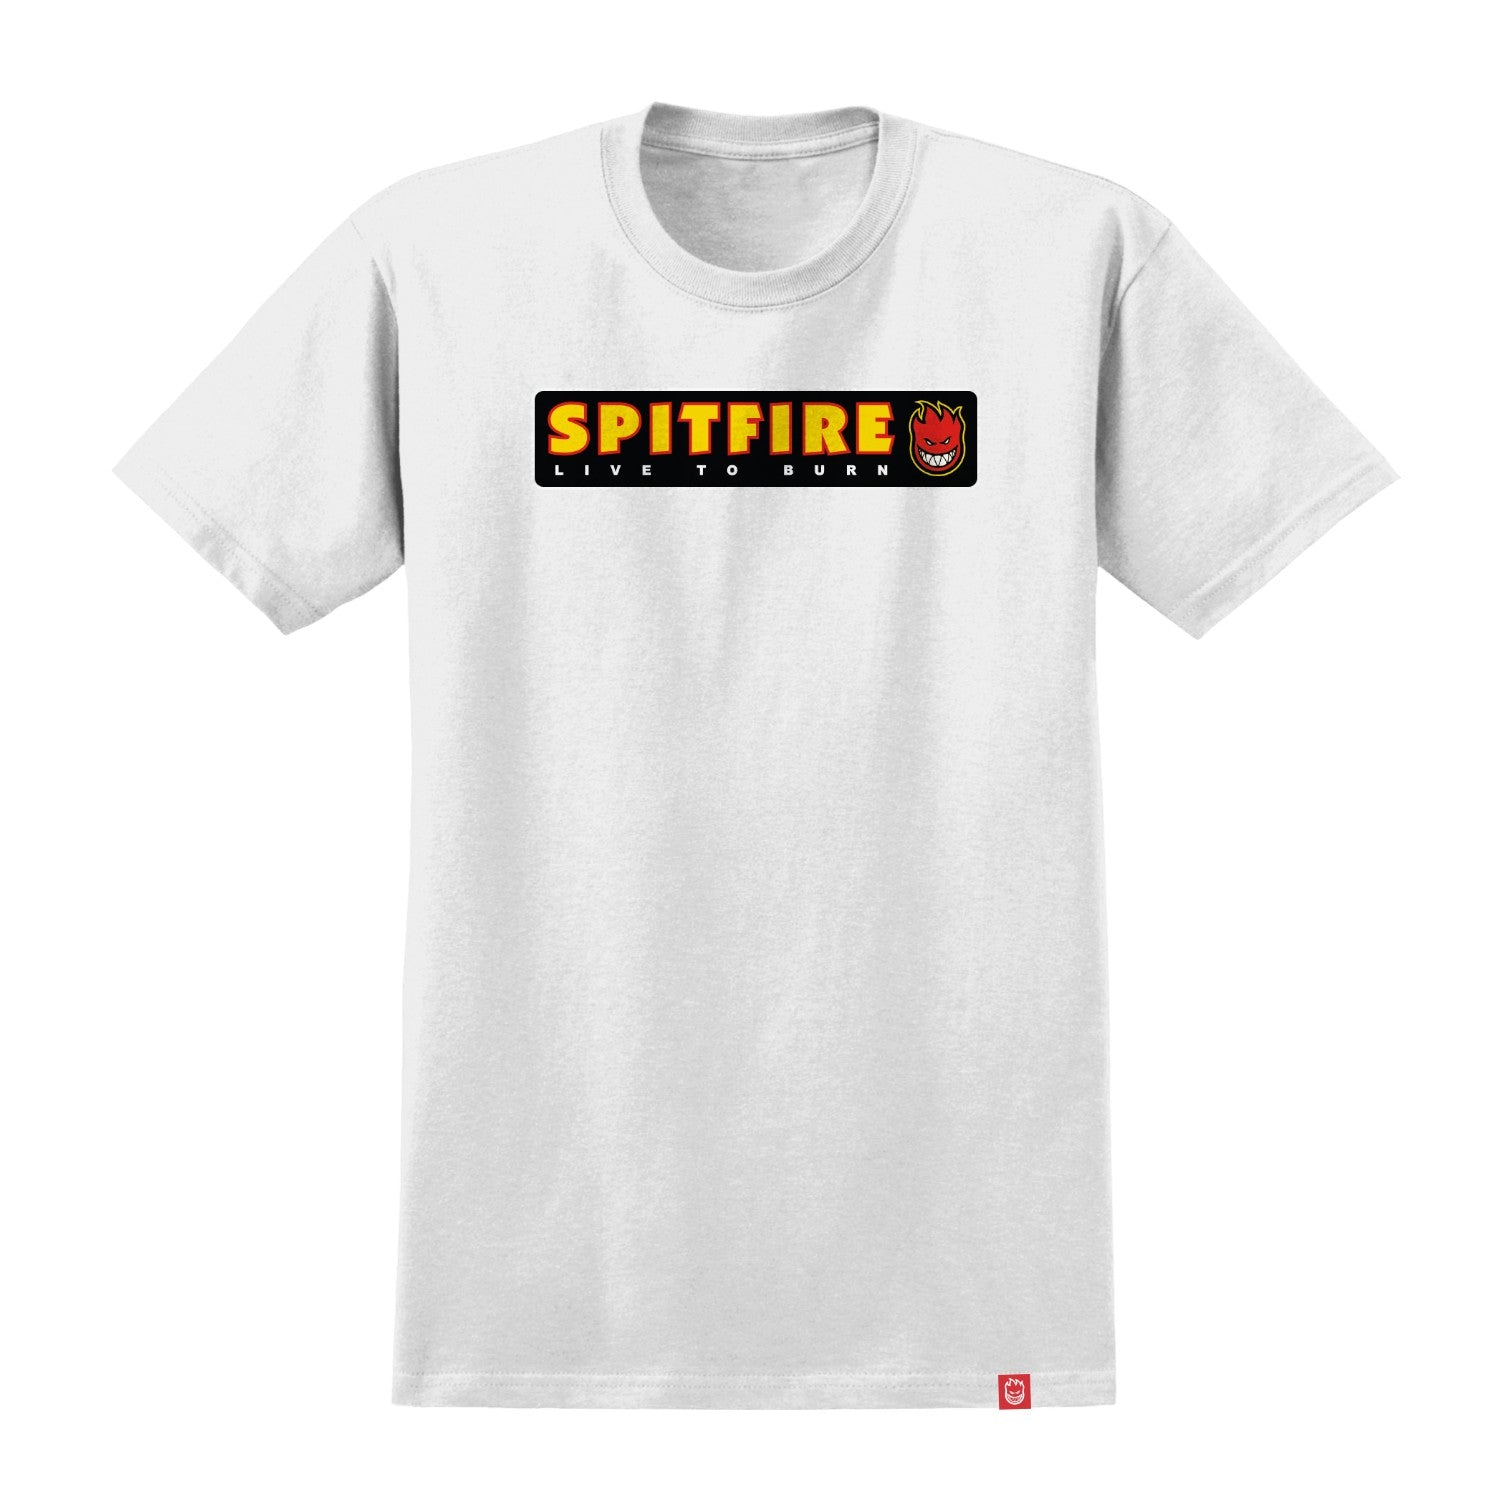 Spitfire LTB Tee - White